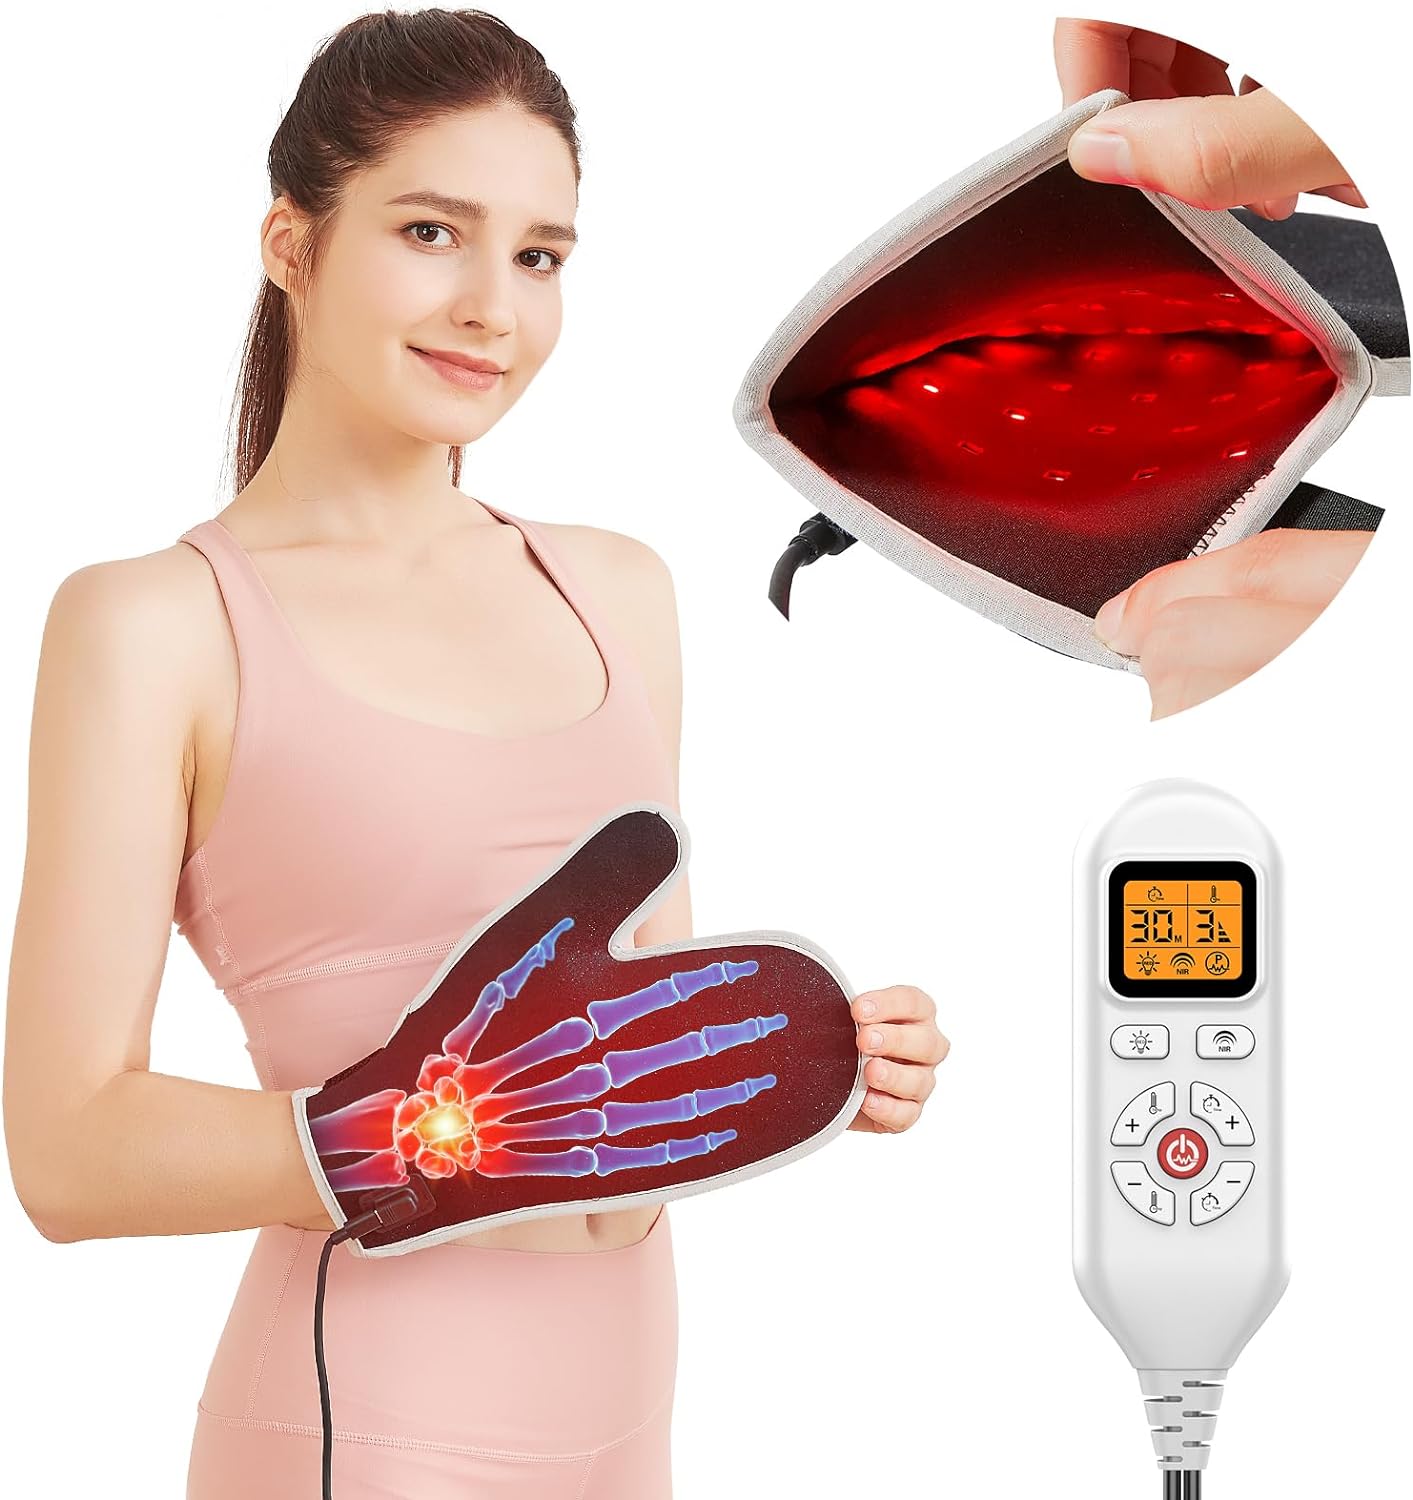 ALDIOUS Red Light Therapy Glove for Hand & Fingers, 660nm & 850nm Infrared Light Therapy For Hand Pain Relief, Double Side Red Light Therapy Belt for Wrist Relief, Auto Shut Off,Adjustable Temperature